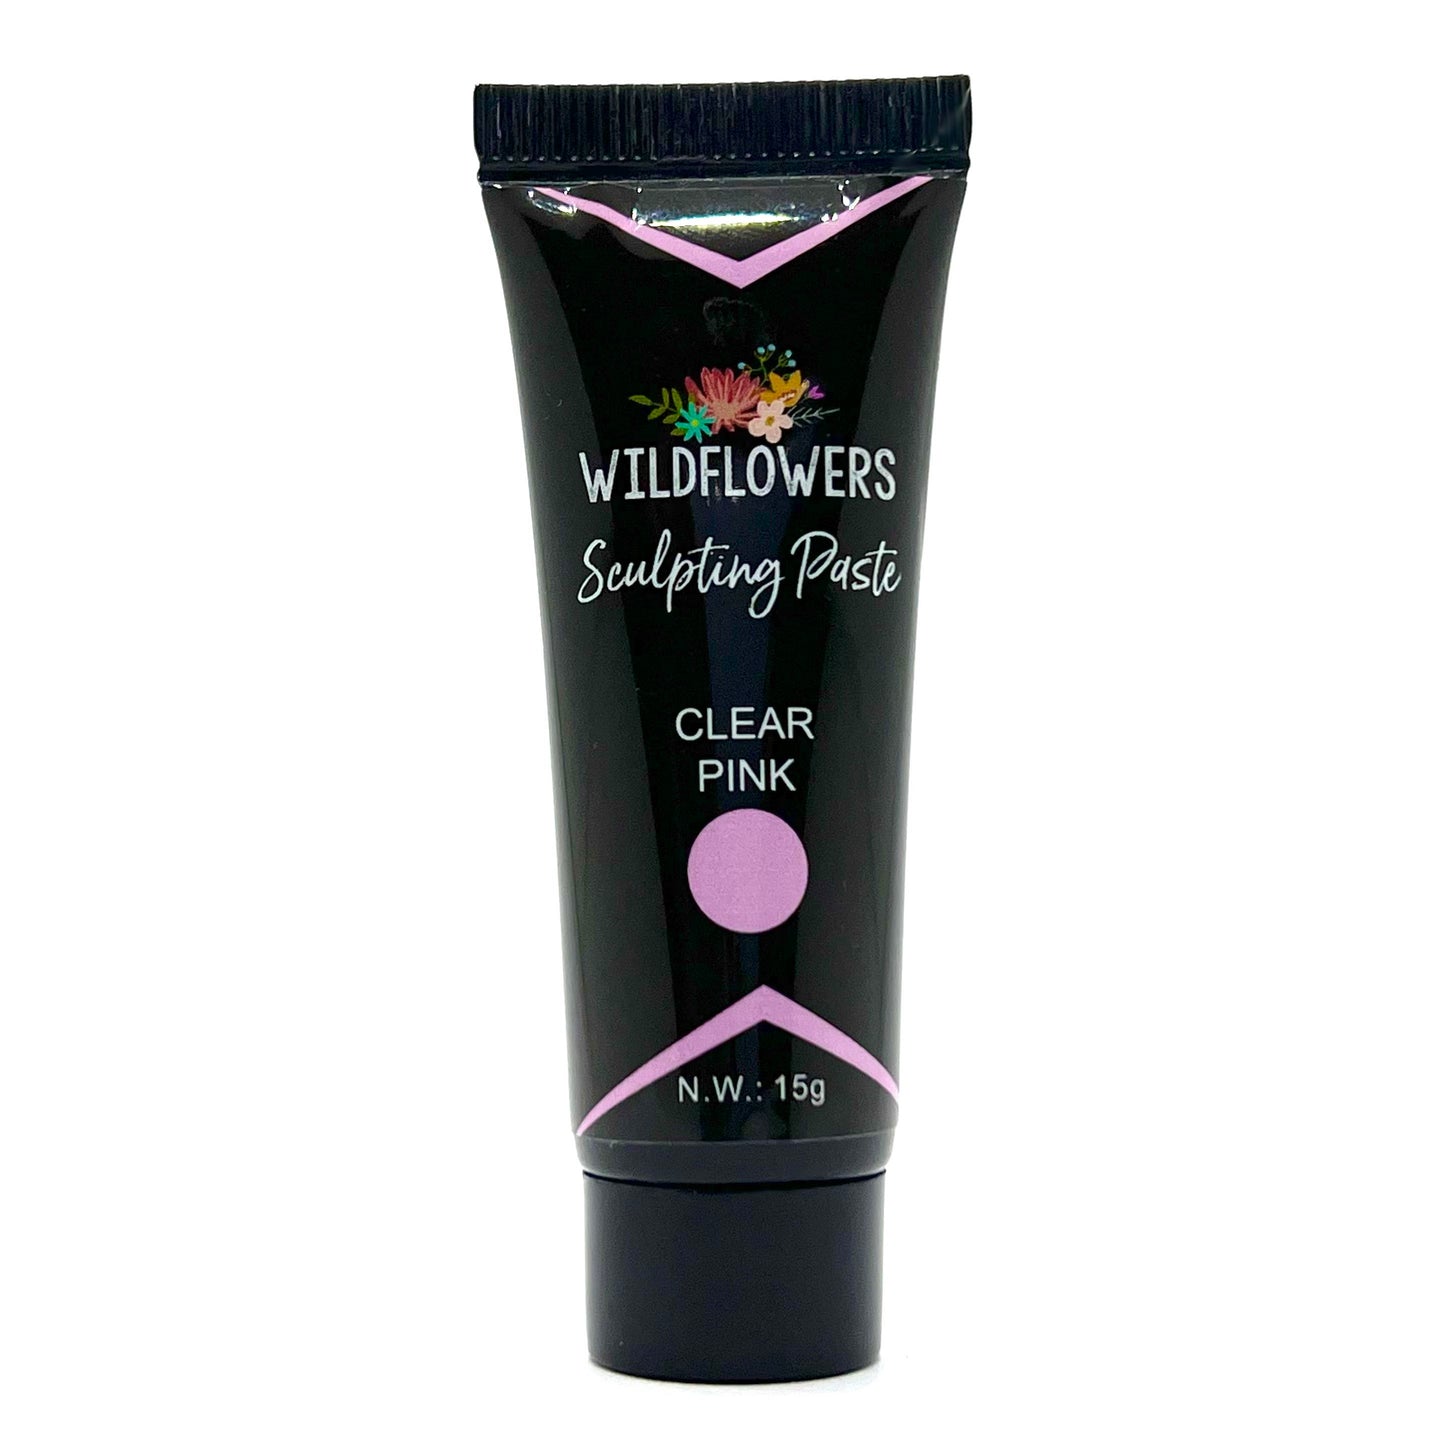 Sculpting Paste - Clear Pink